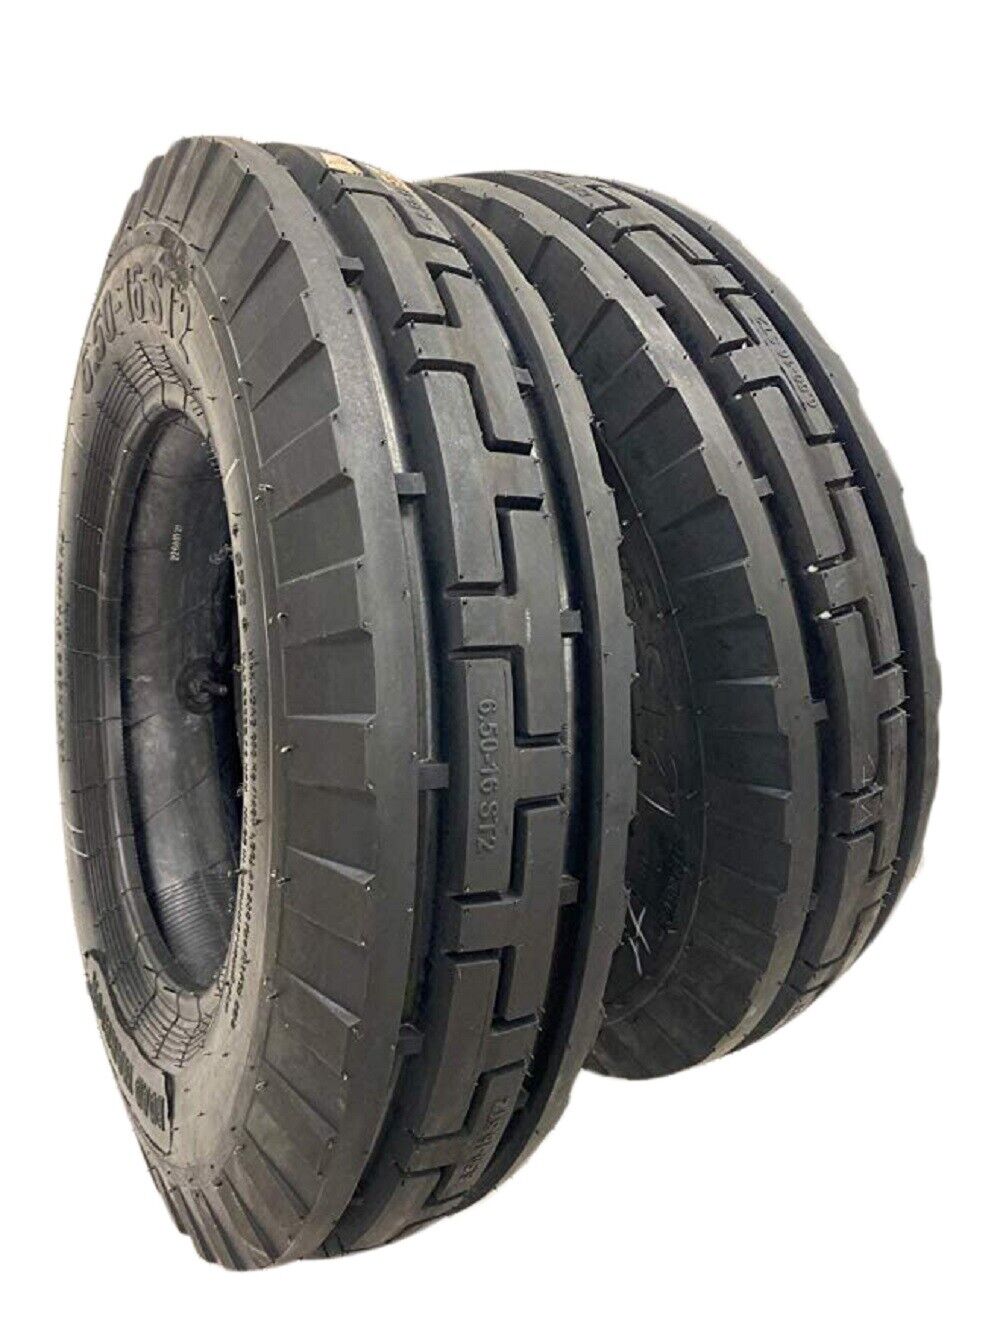 (2 TIRES + 2 TUBES) 6.50-16 10 PLY ST2 Farm Tractor Tires W/Tube 6.50x16  Road Warrior 650168F2W1573T